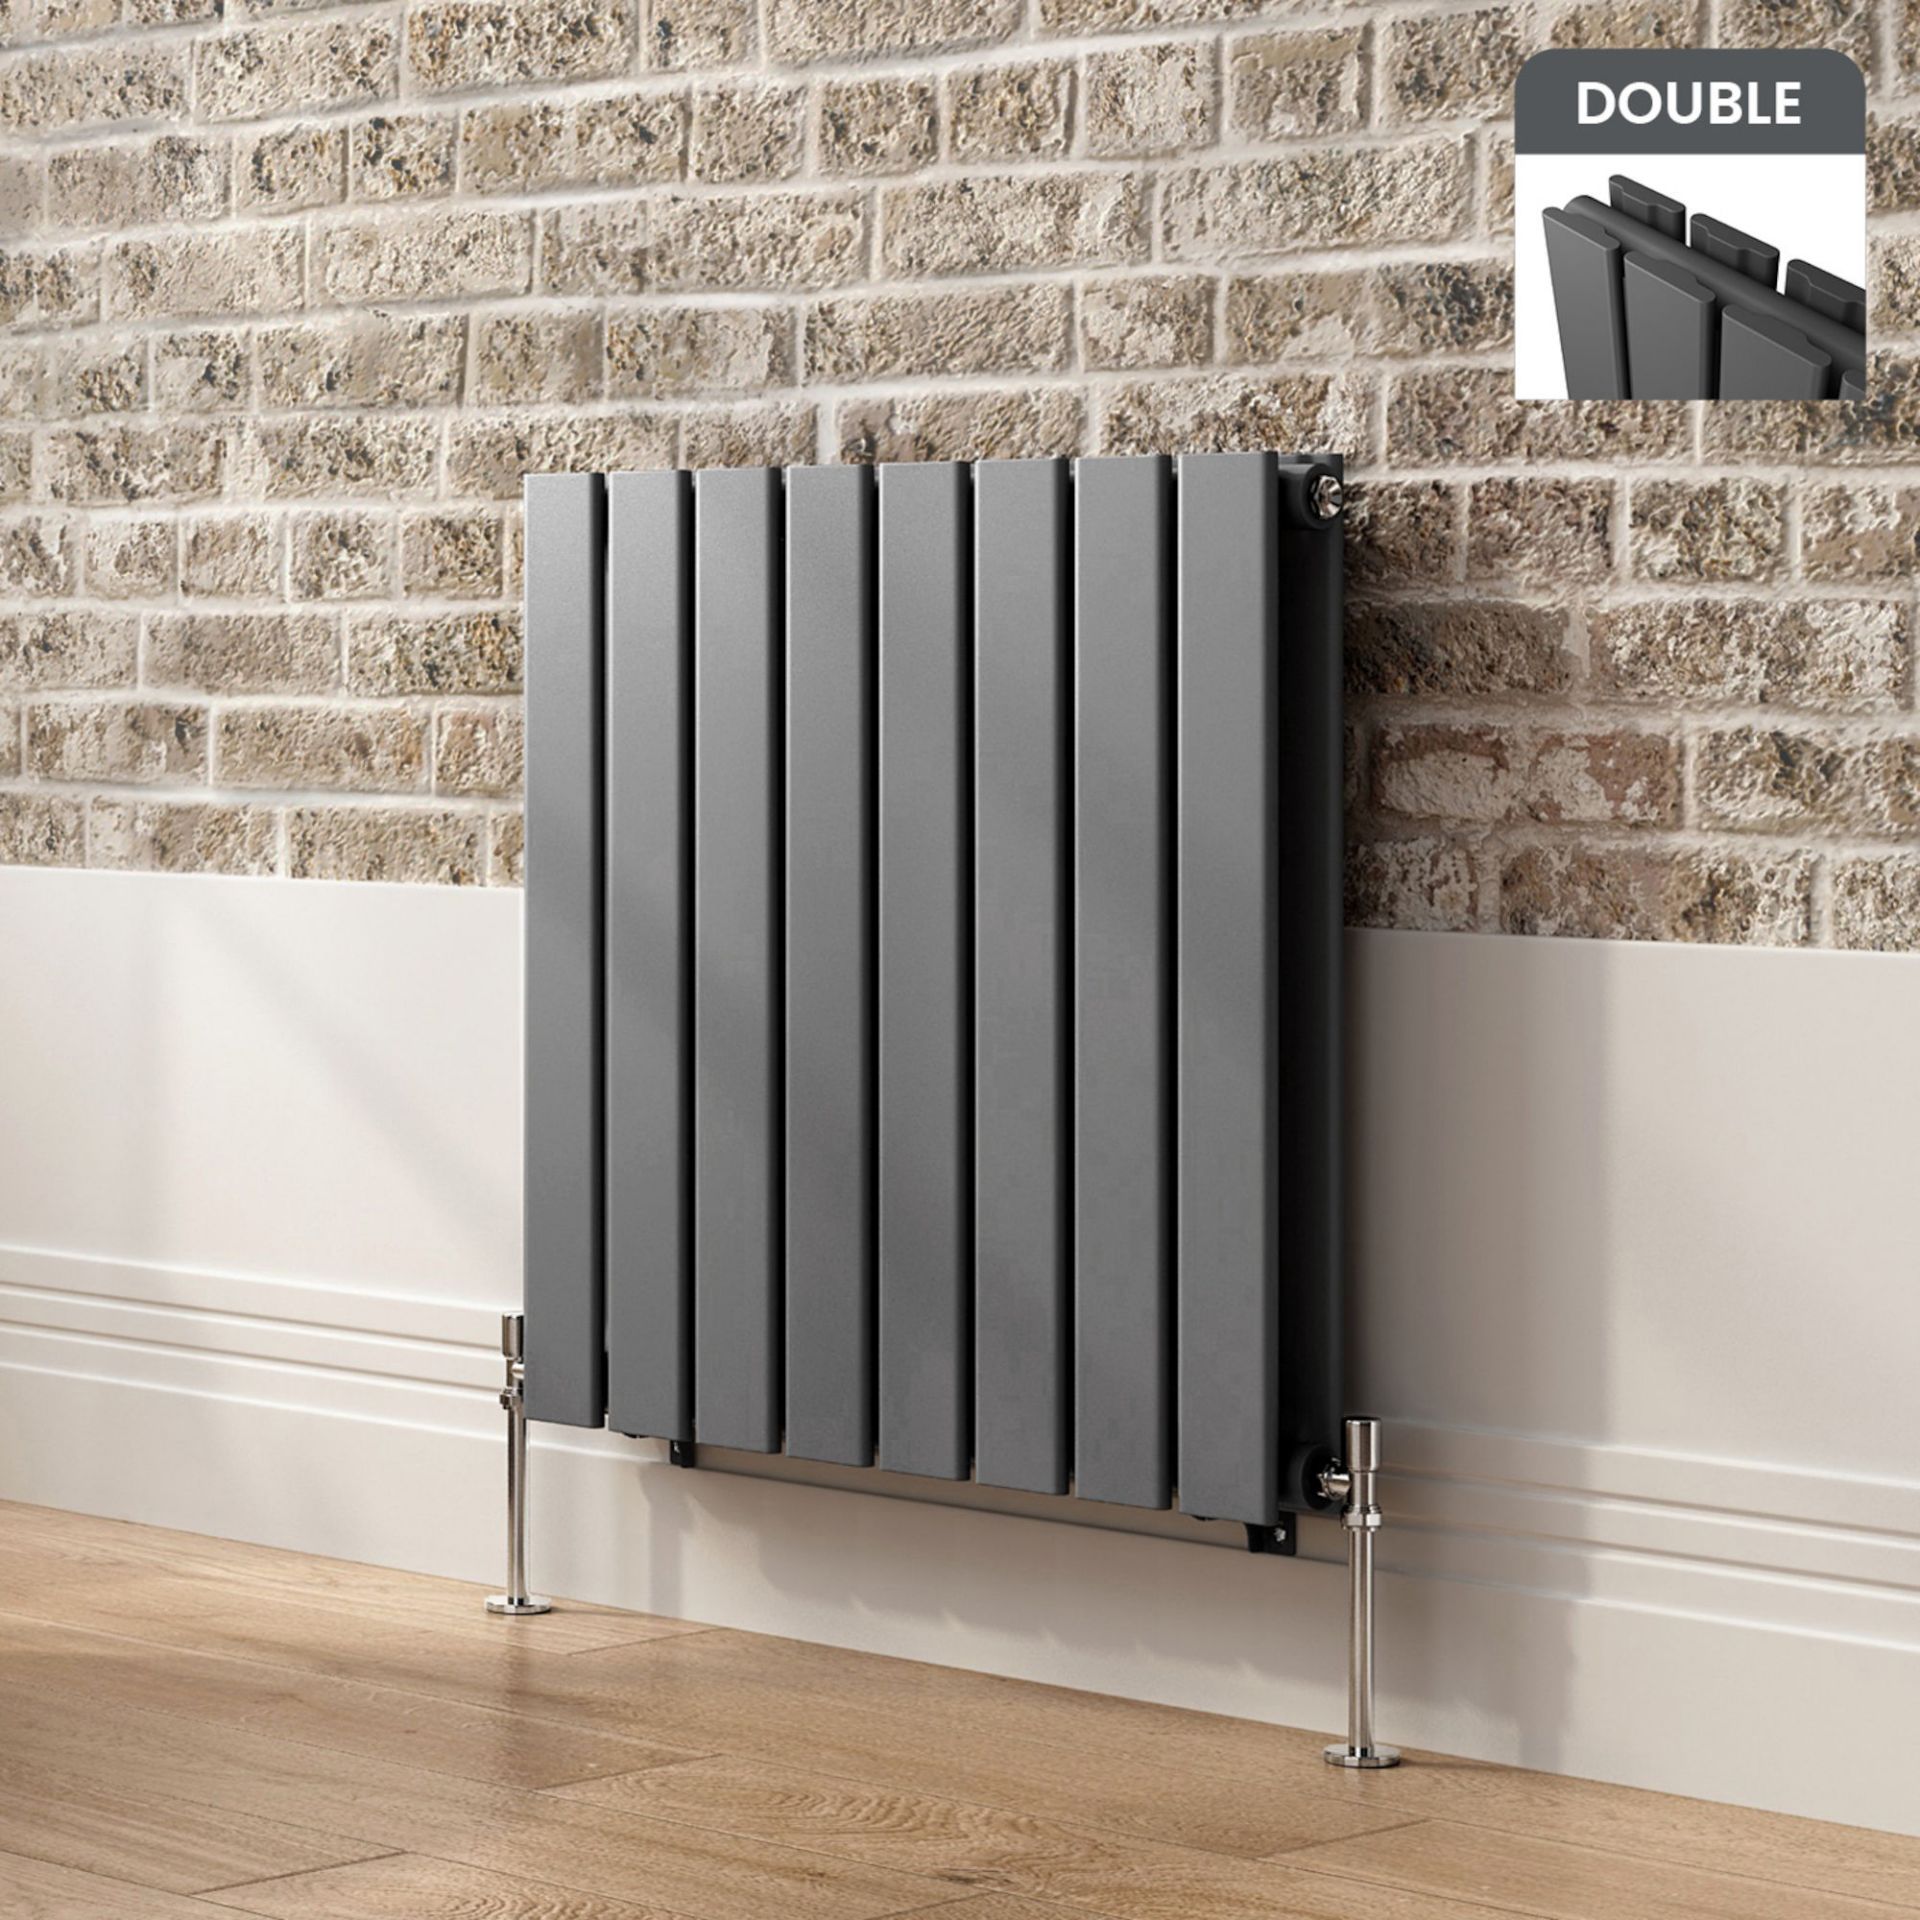 (MW15) 600x600mm Anthracite Double Flat Panel Horizontal Radiator. RRP £229.99. Made with high grade